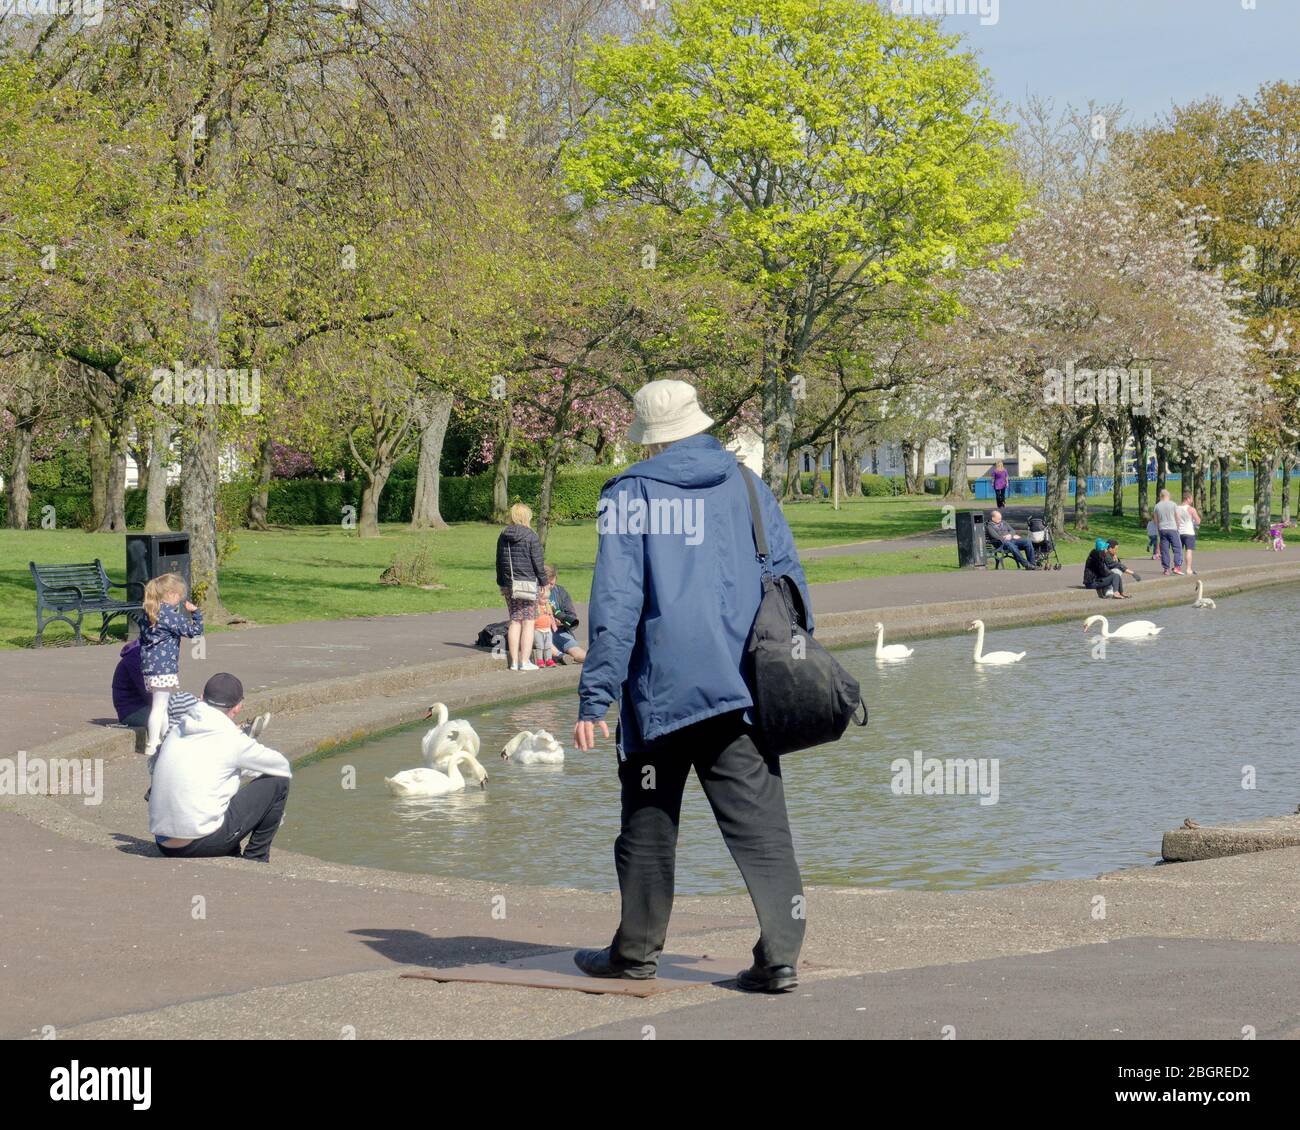 Glasgow, Scotland, UK, 22nd  April, 2020: Social distancing and exercising continue near Glasgow with its park life. Gerard Ferry/ Alamy Live News Stock Photo